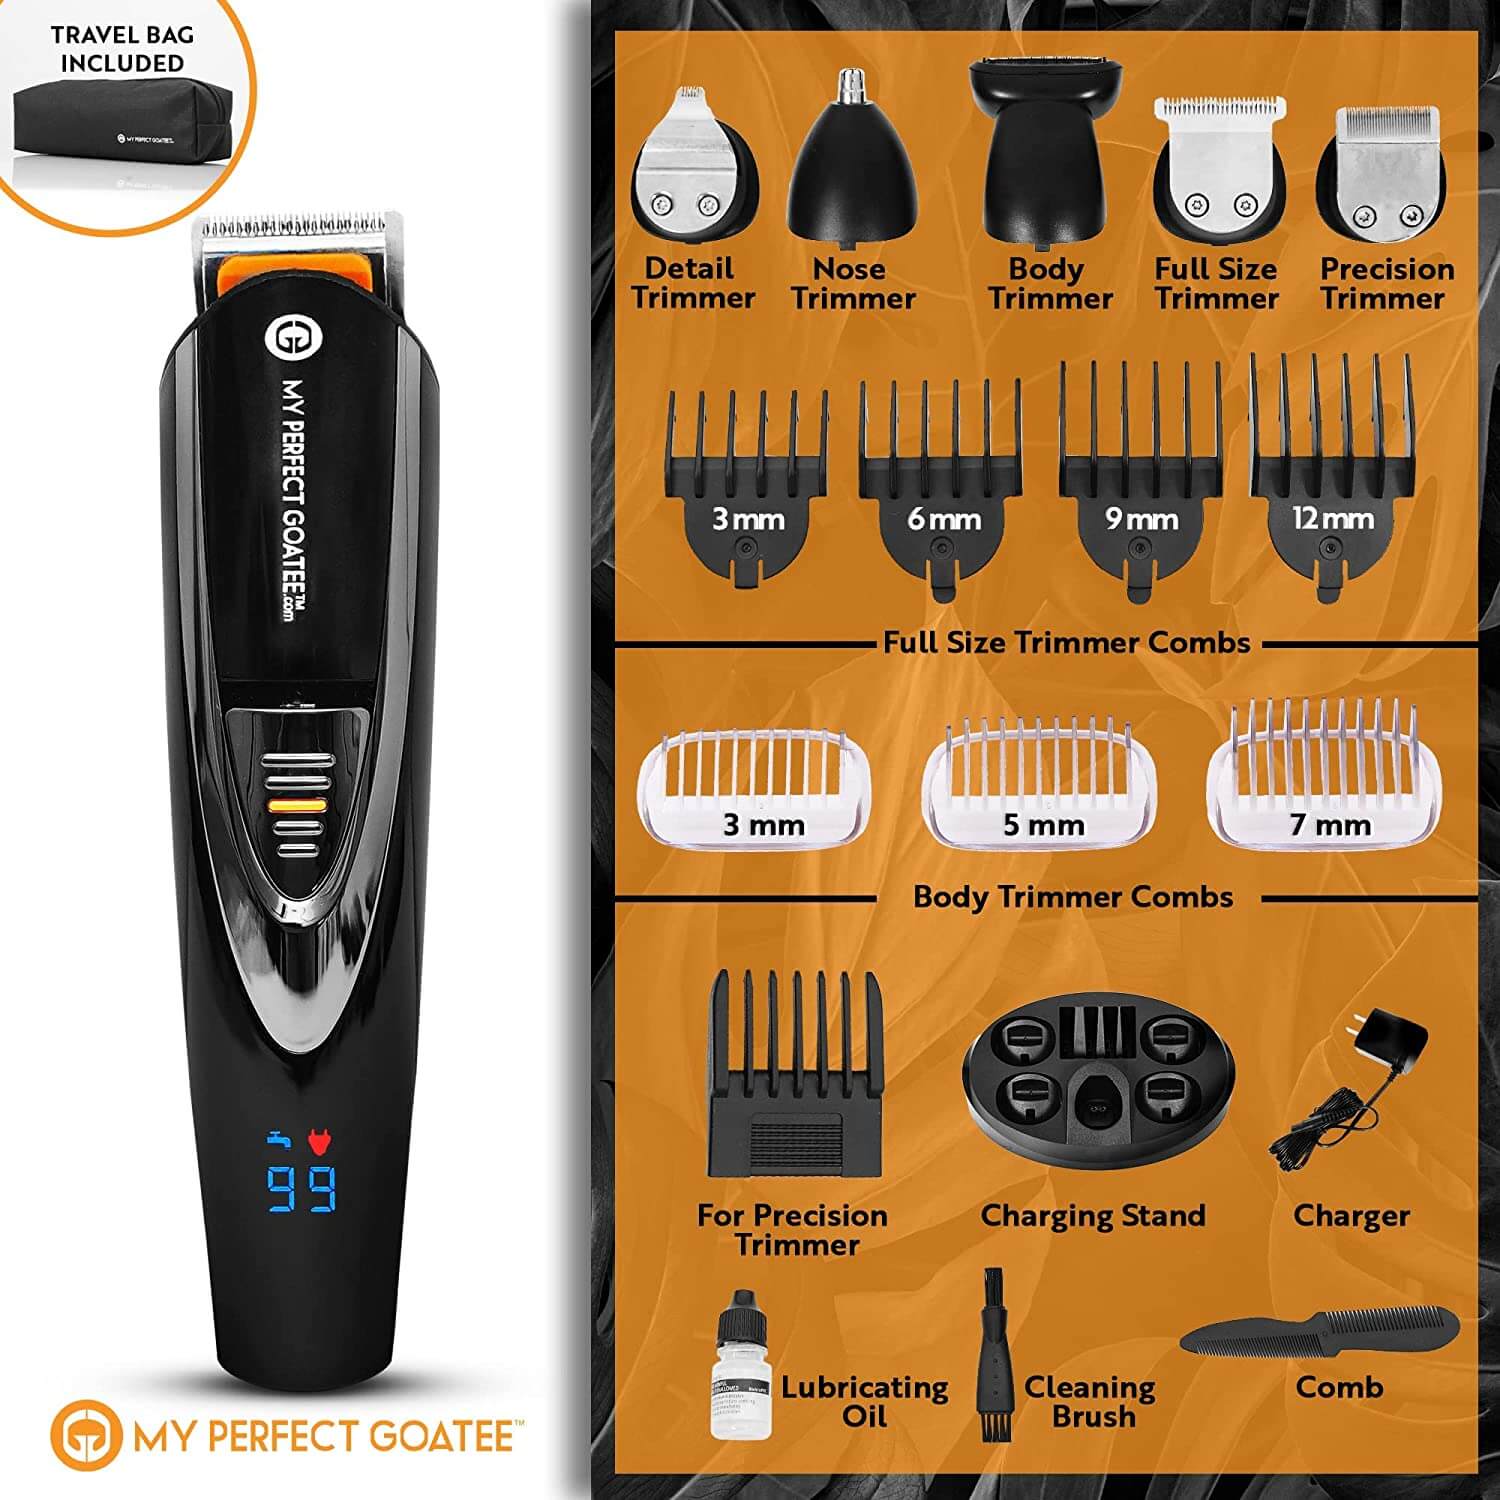 Beard Trimmer MPG-800S showing different attachments that come with this model